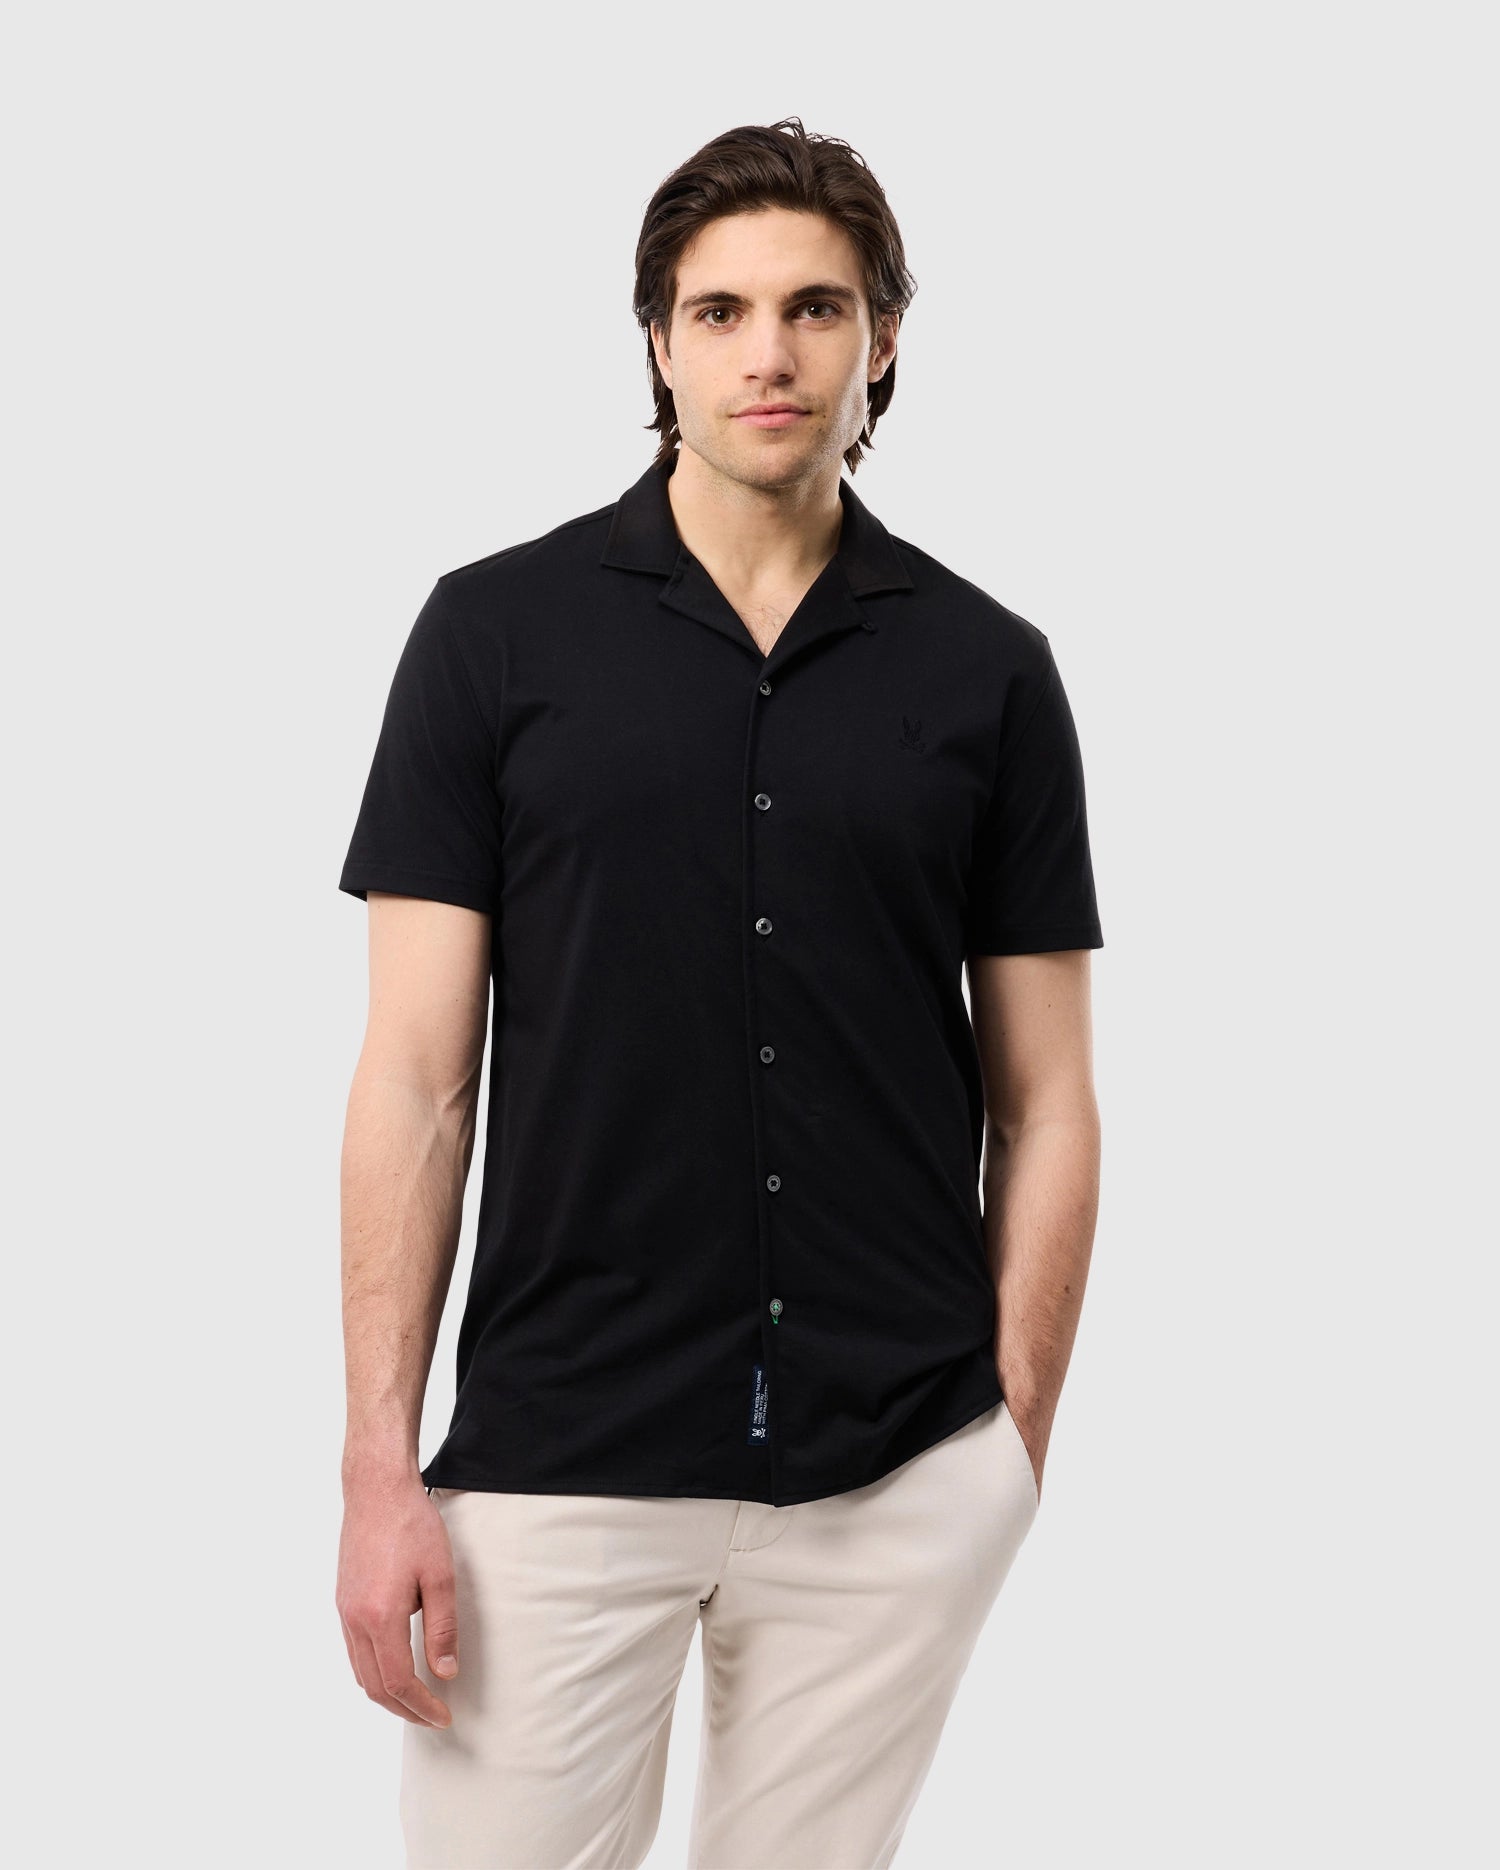 A man with dark hair wearing a black Psycho Bunny MENS KELLER CAMP COLLAR SHORT SLEEVE SHIRT - B6Q448C200 made from a Pima cotton-blend and white pants stands against a plain white background. His right hand is in his pocket while his left arm rests by his side. He has a neutral expression on his face.